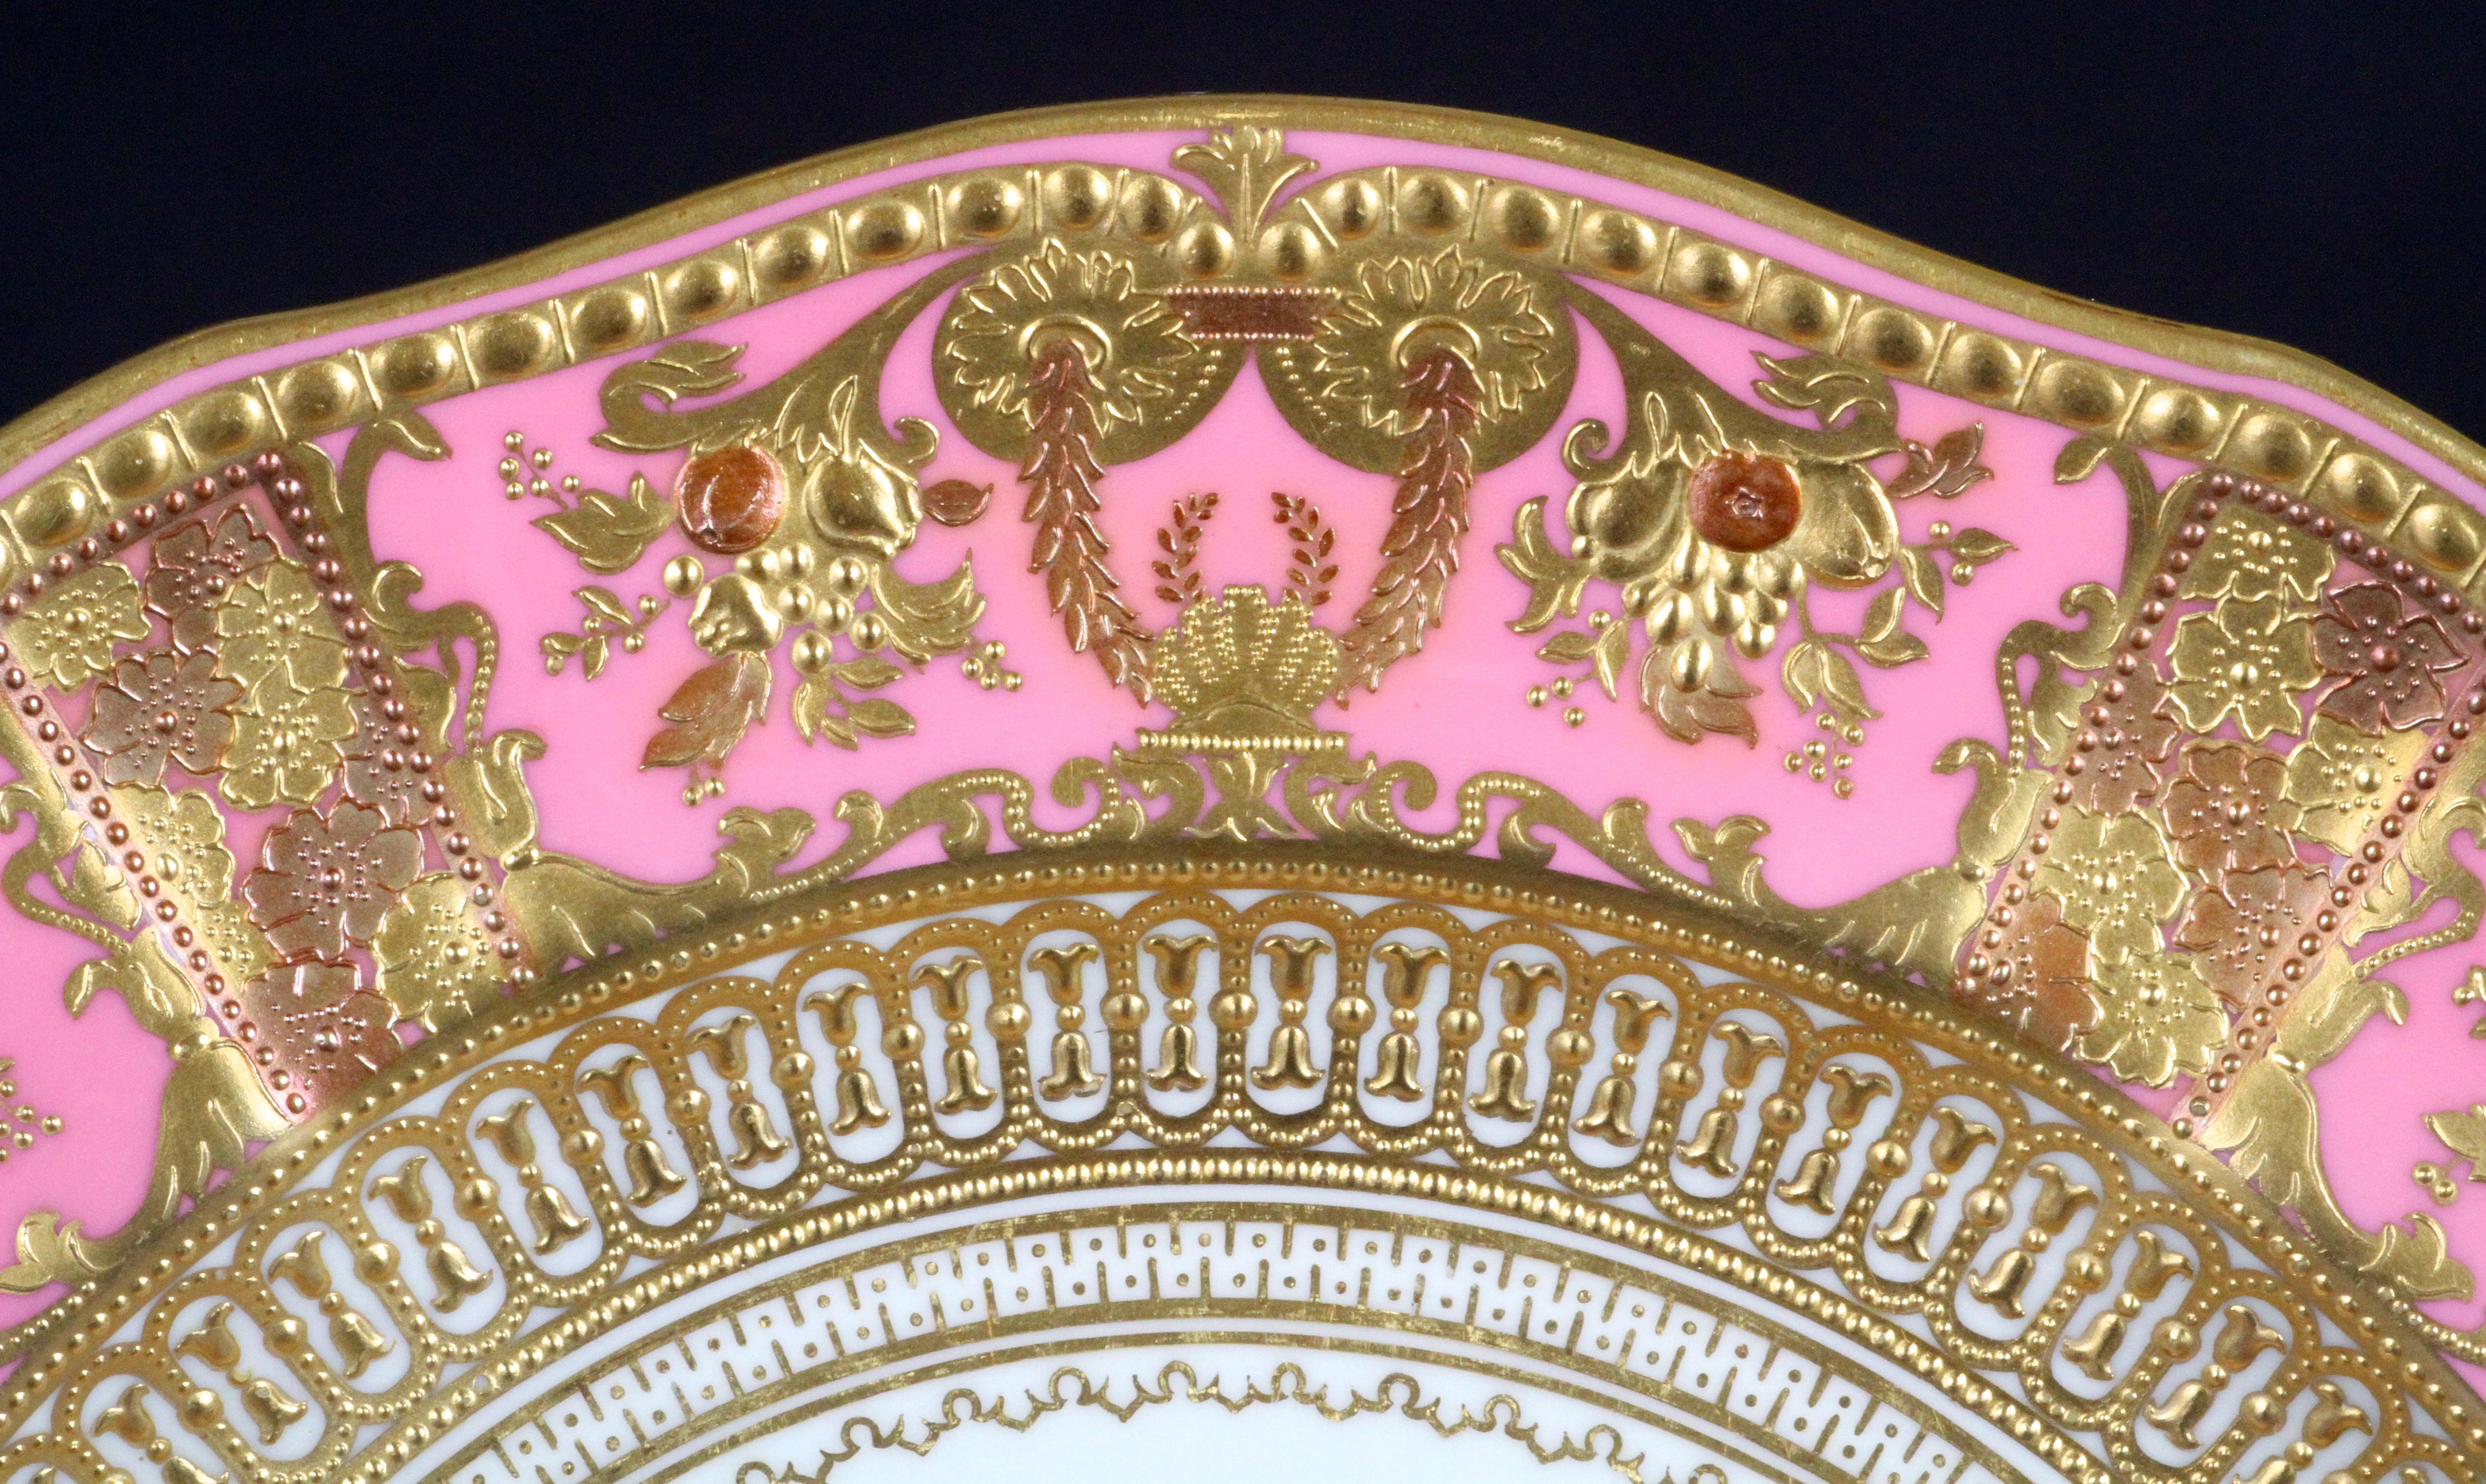 Fired Service of 19th Century Derby Pink Service Plates with Elaborate 2-Color Gilding